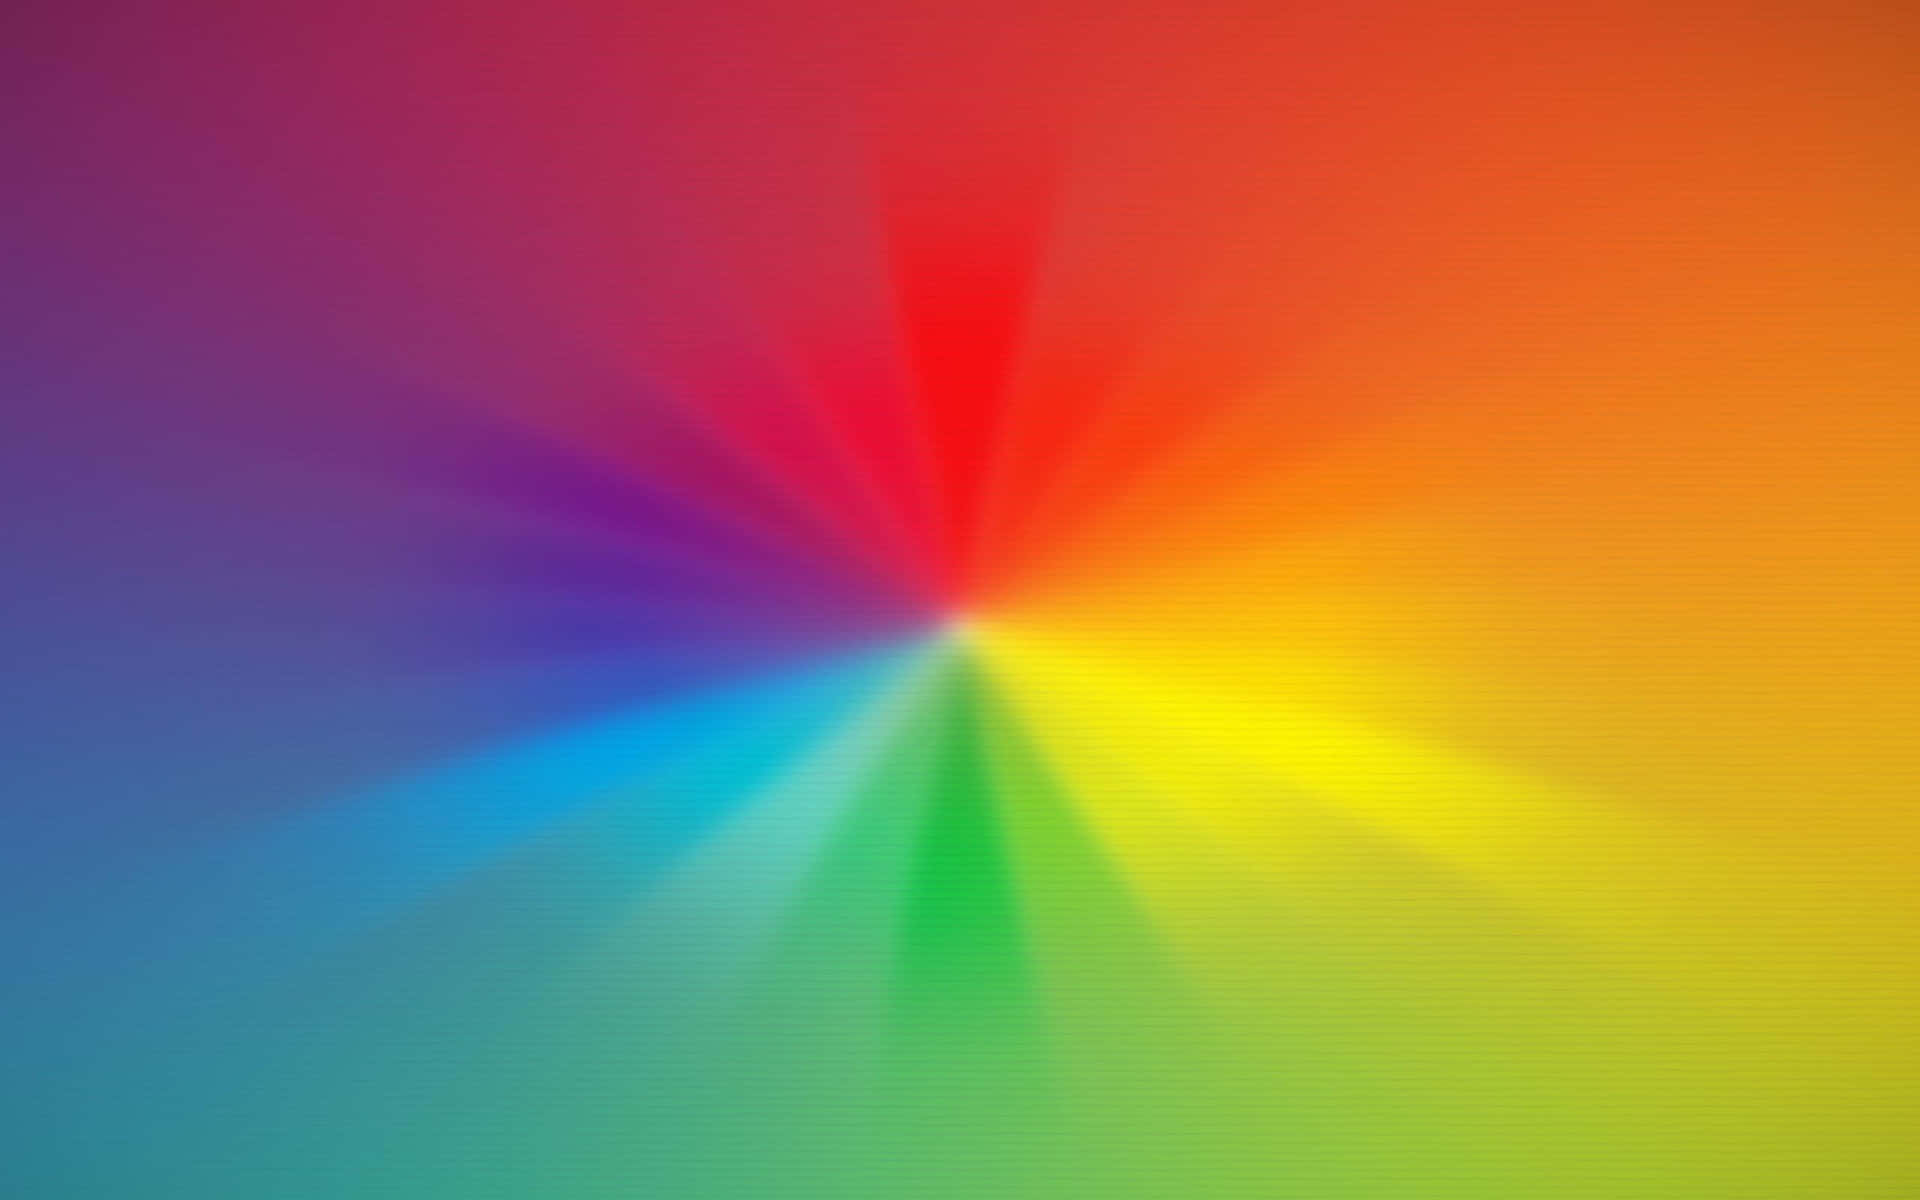 Lively&Vibrant - A Multicolor Background